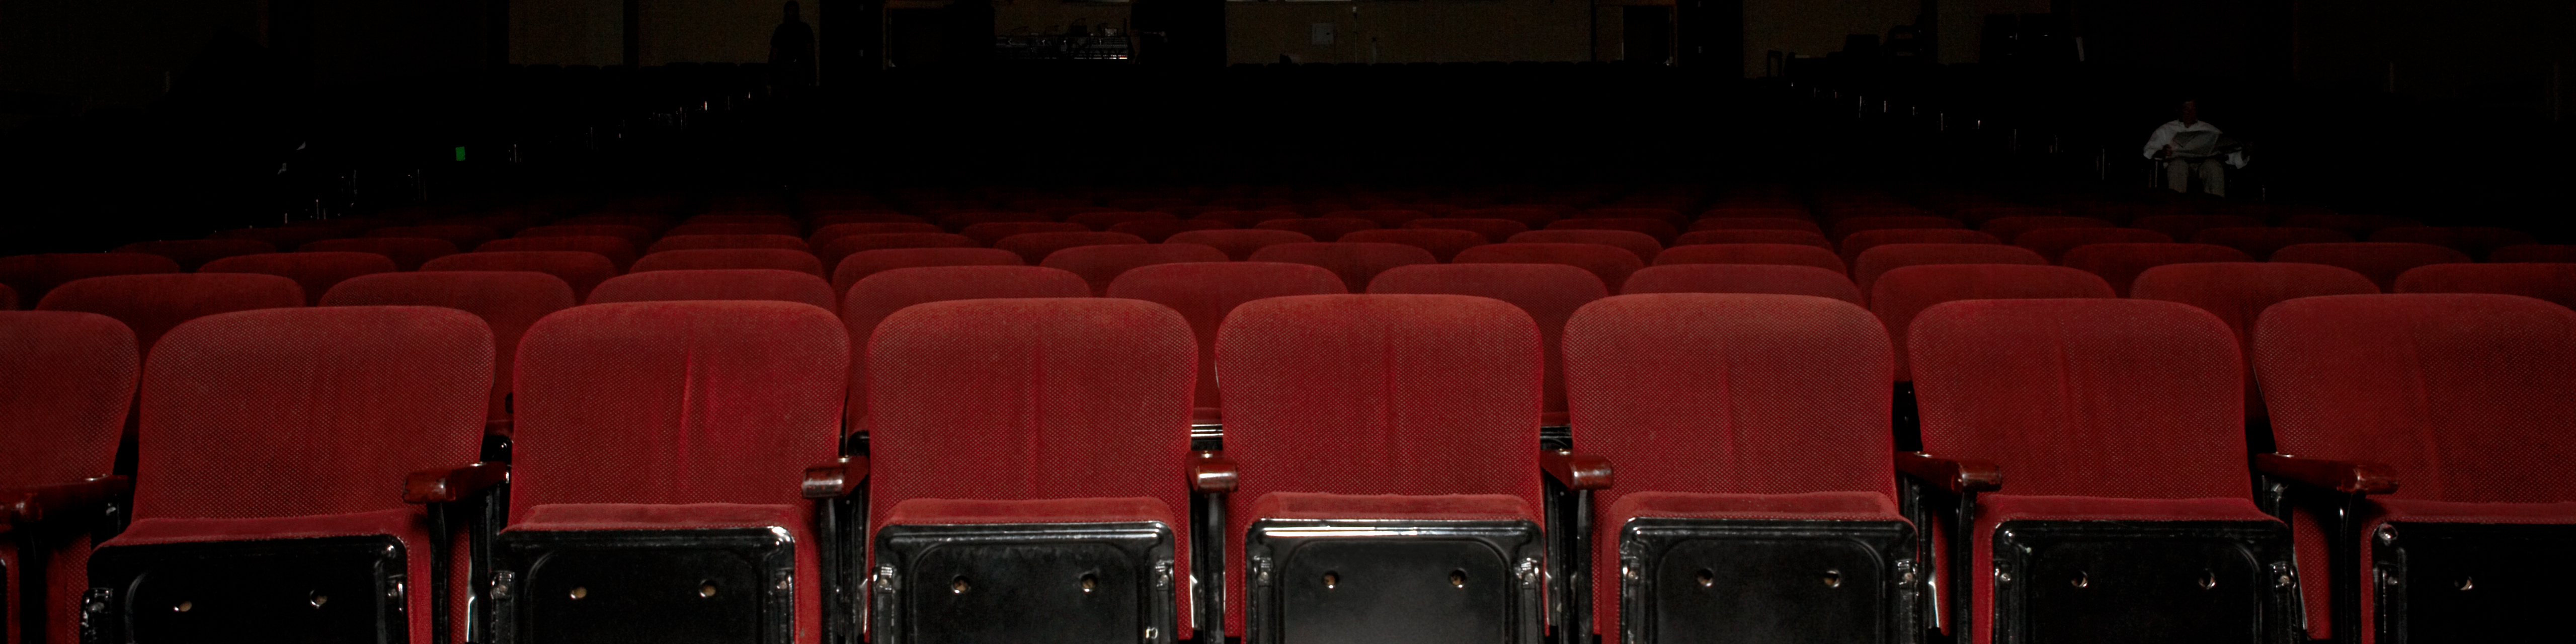 Row of empty movie theater seats with popcorn strewn on the floor